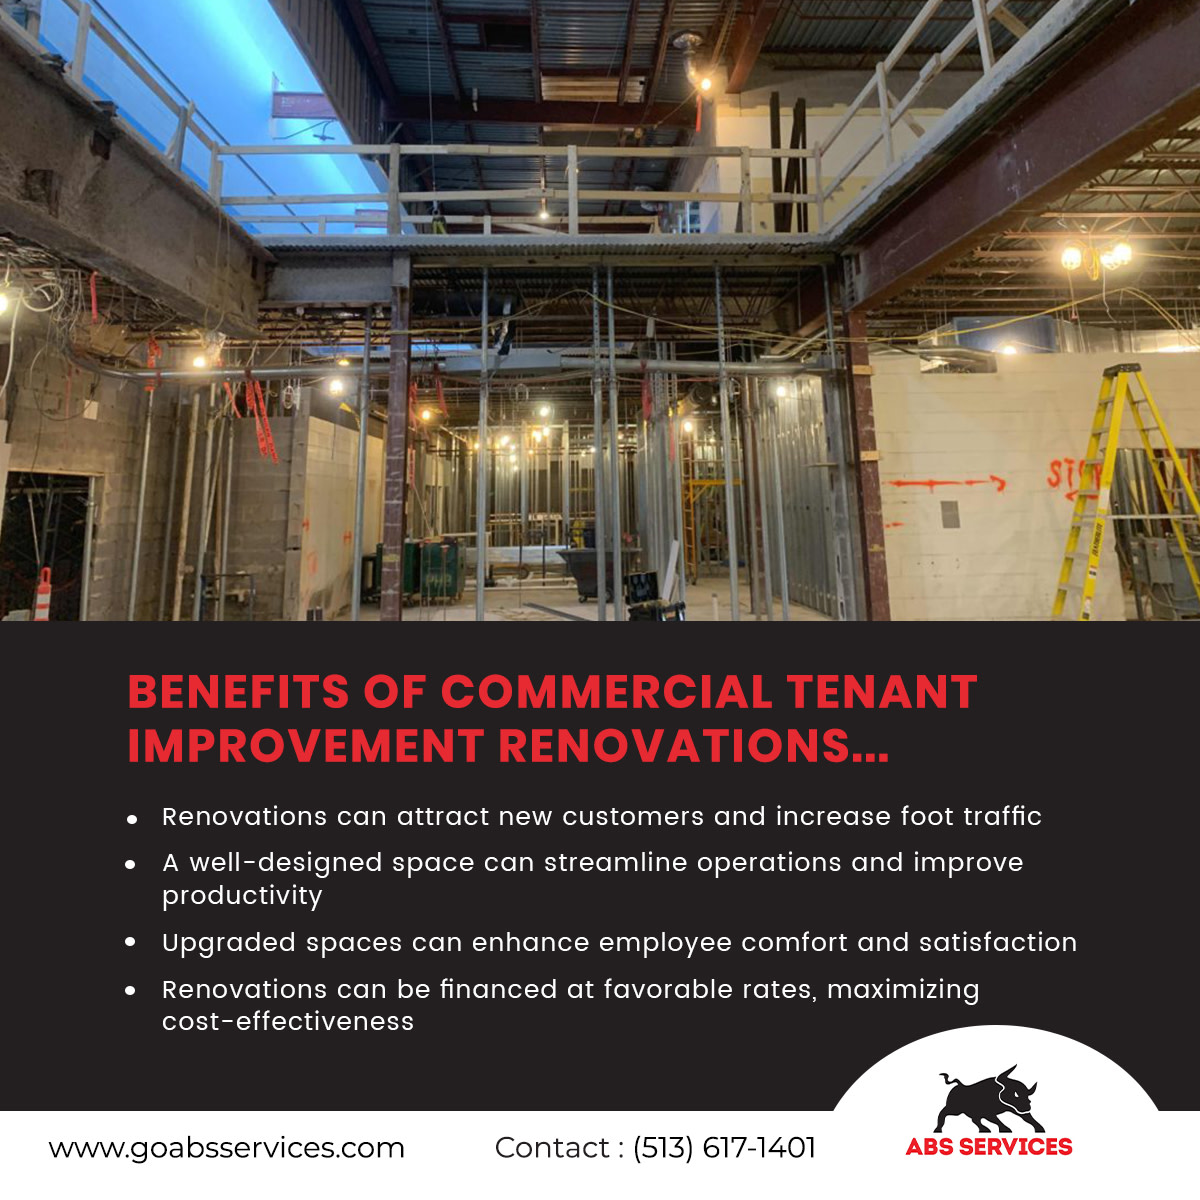 ABS Services - Benefits of Commercial Tenant Improvement Renovations...
LEARN MORE... goabsservices.com/tips-for-a-suc…

#tenantimprovement #construction #commercialbuildout #commercialproperty #commercialconstruction #buildout #constructioncincinnati #constructionbuildout #cincinnati